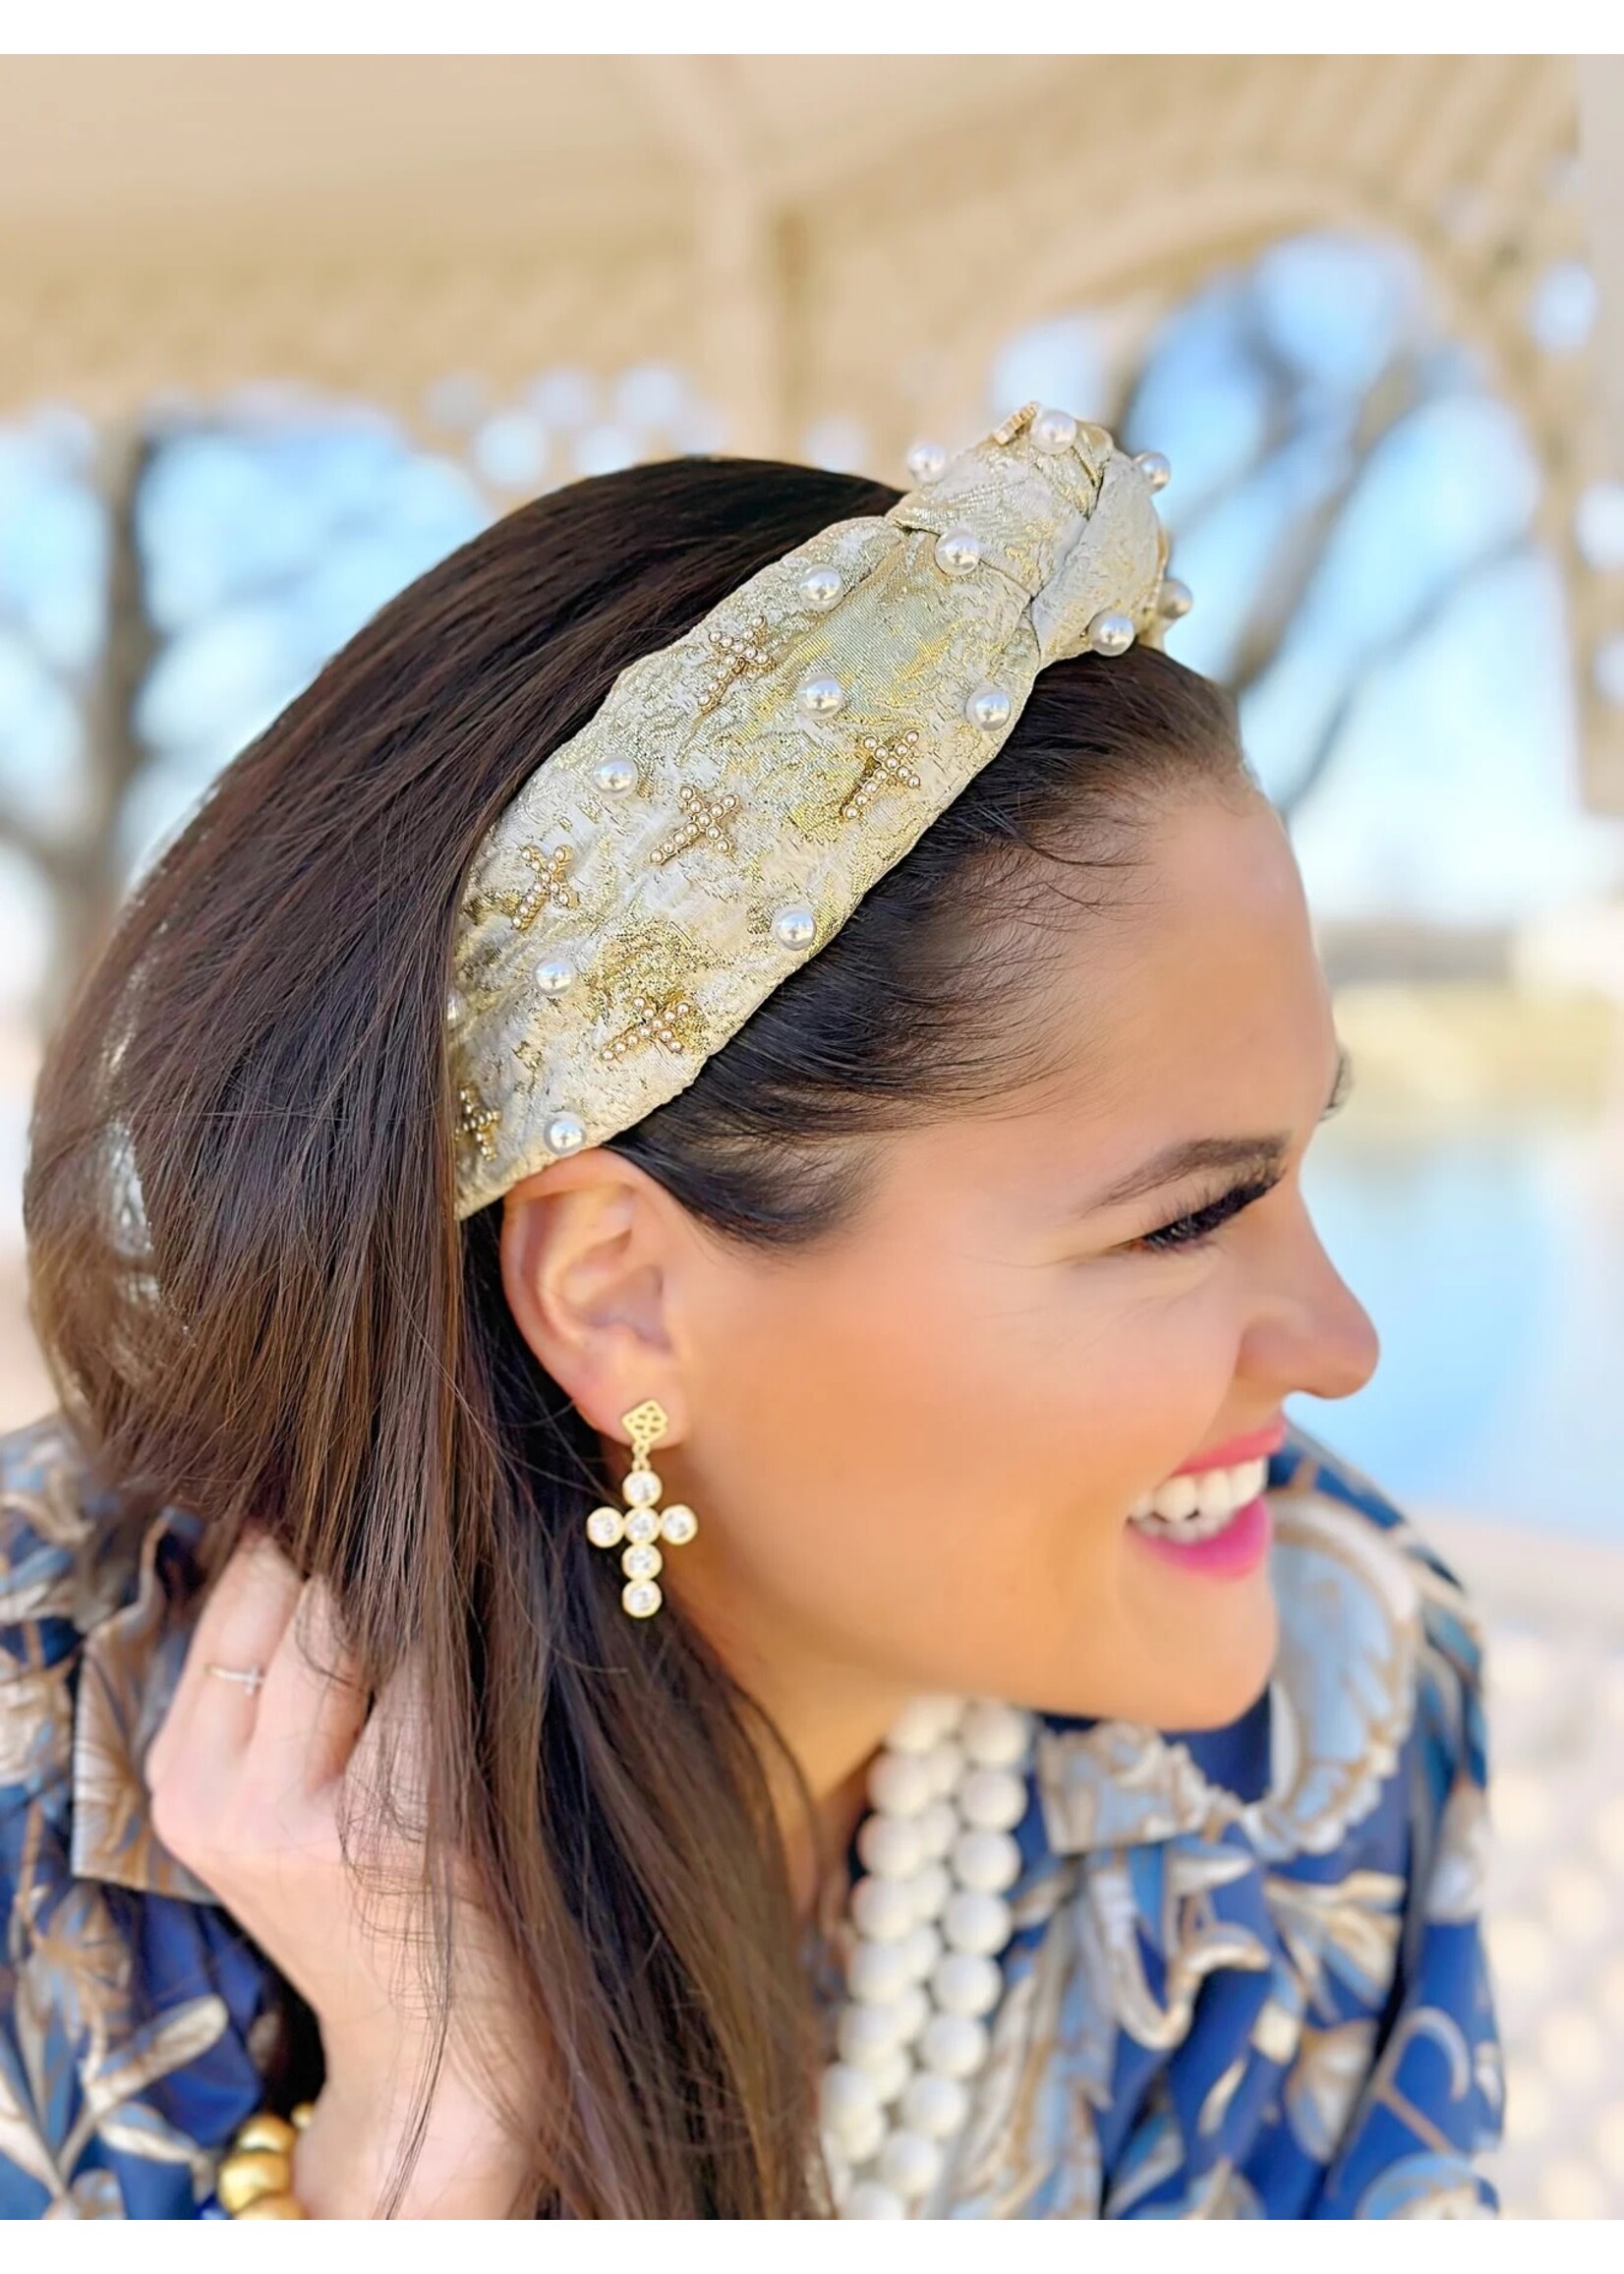 Brianna Cannon GOLD AND IVORY METALLIC HEADBAND WITH PEARLS AND CROSSES